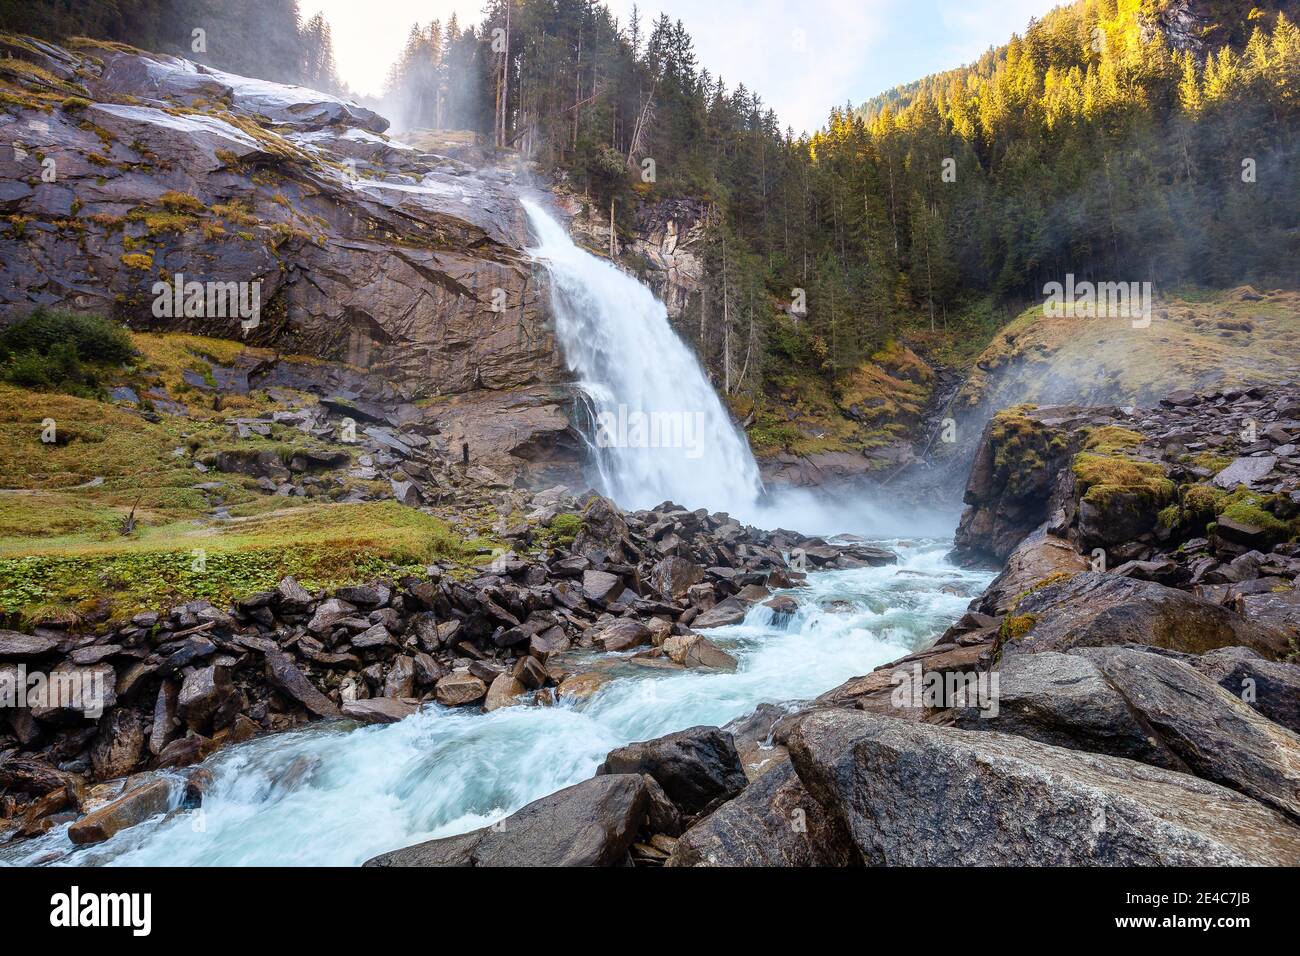 The Krimmler Waterfalls in Krimml, Austria are the highes in Europe. Stock Photo